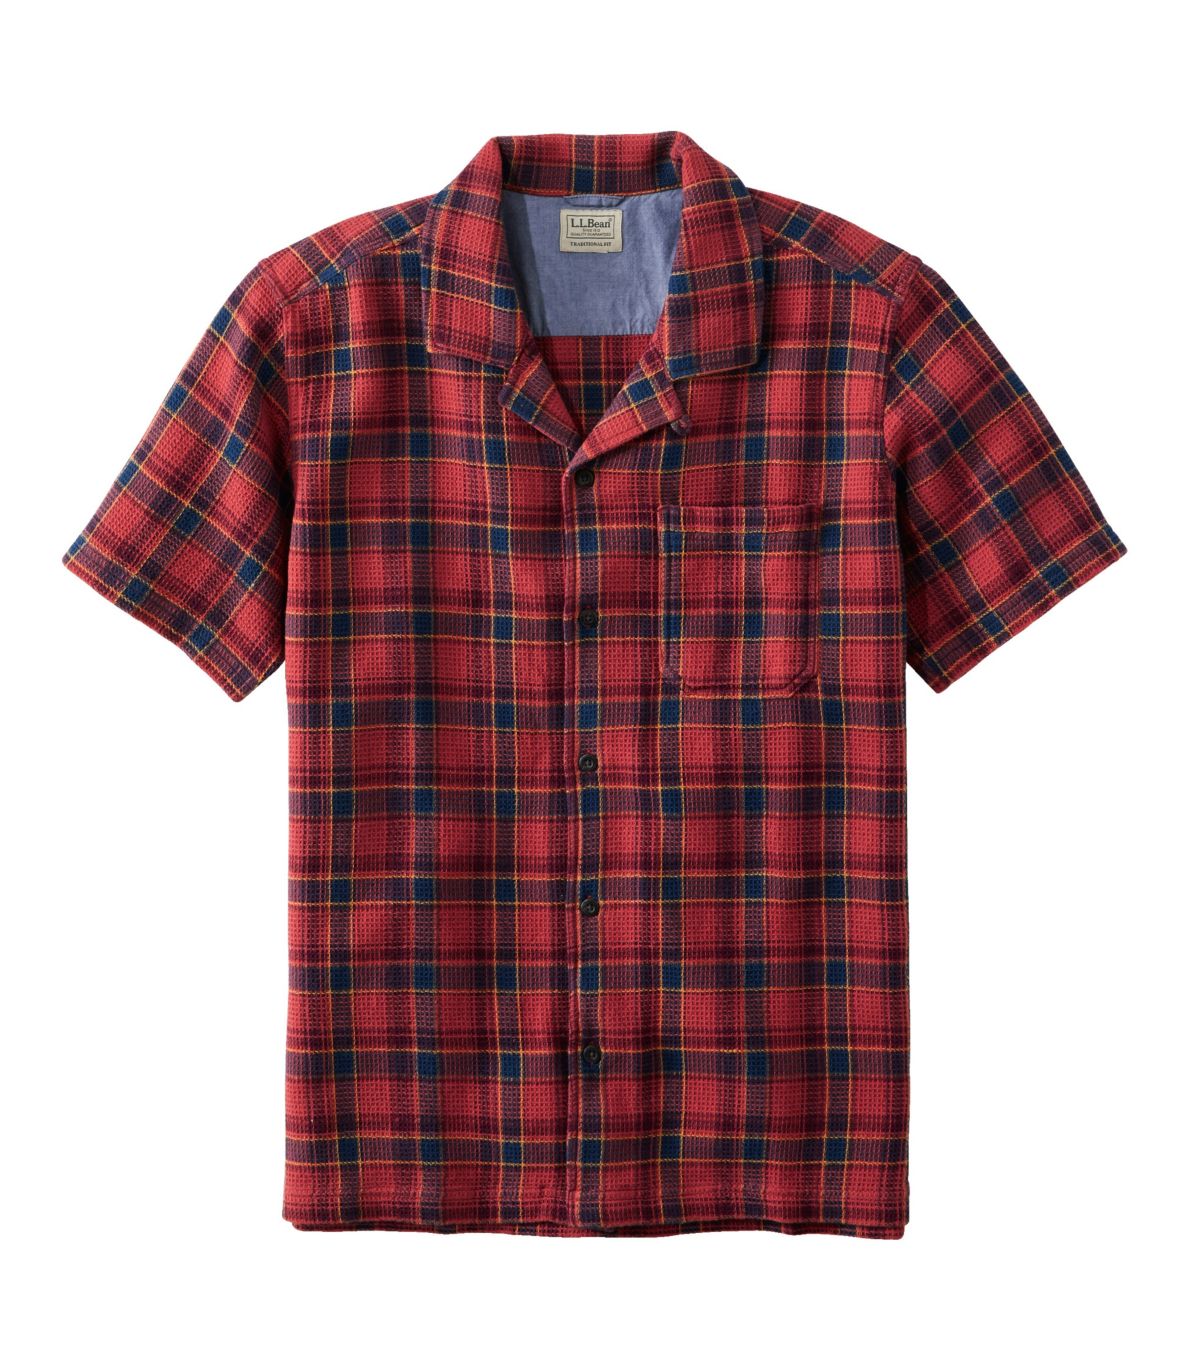 Men's Rugged Waffle Shirt, Plaid, Traditional Untucked Fit, Short-Sleeve